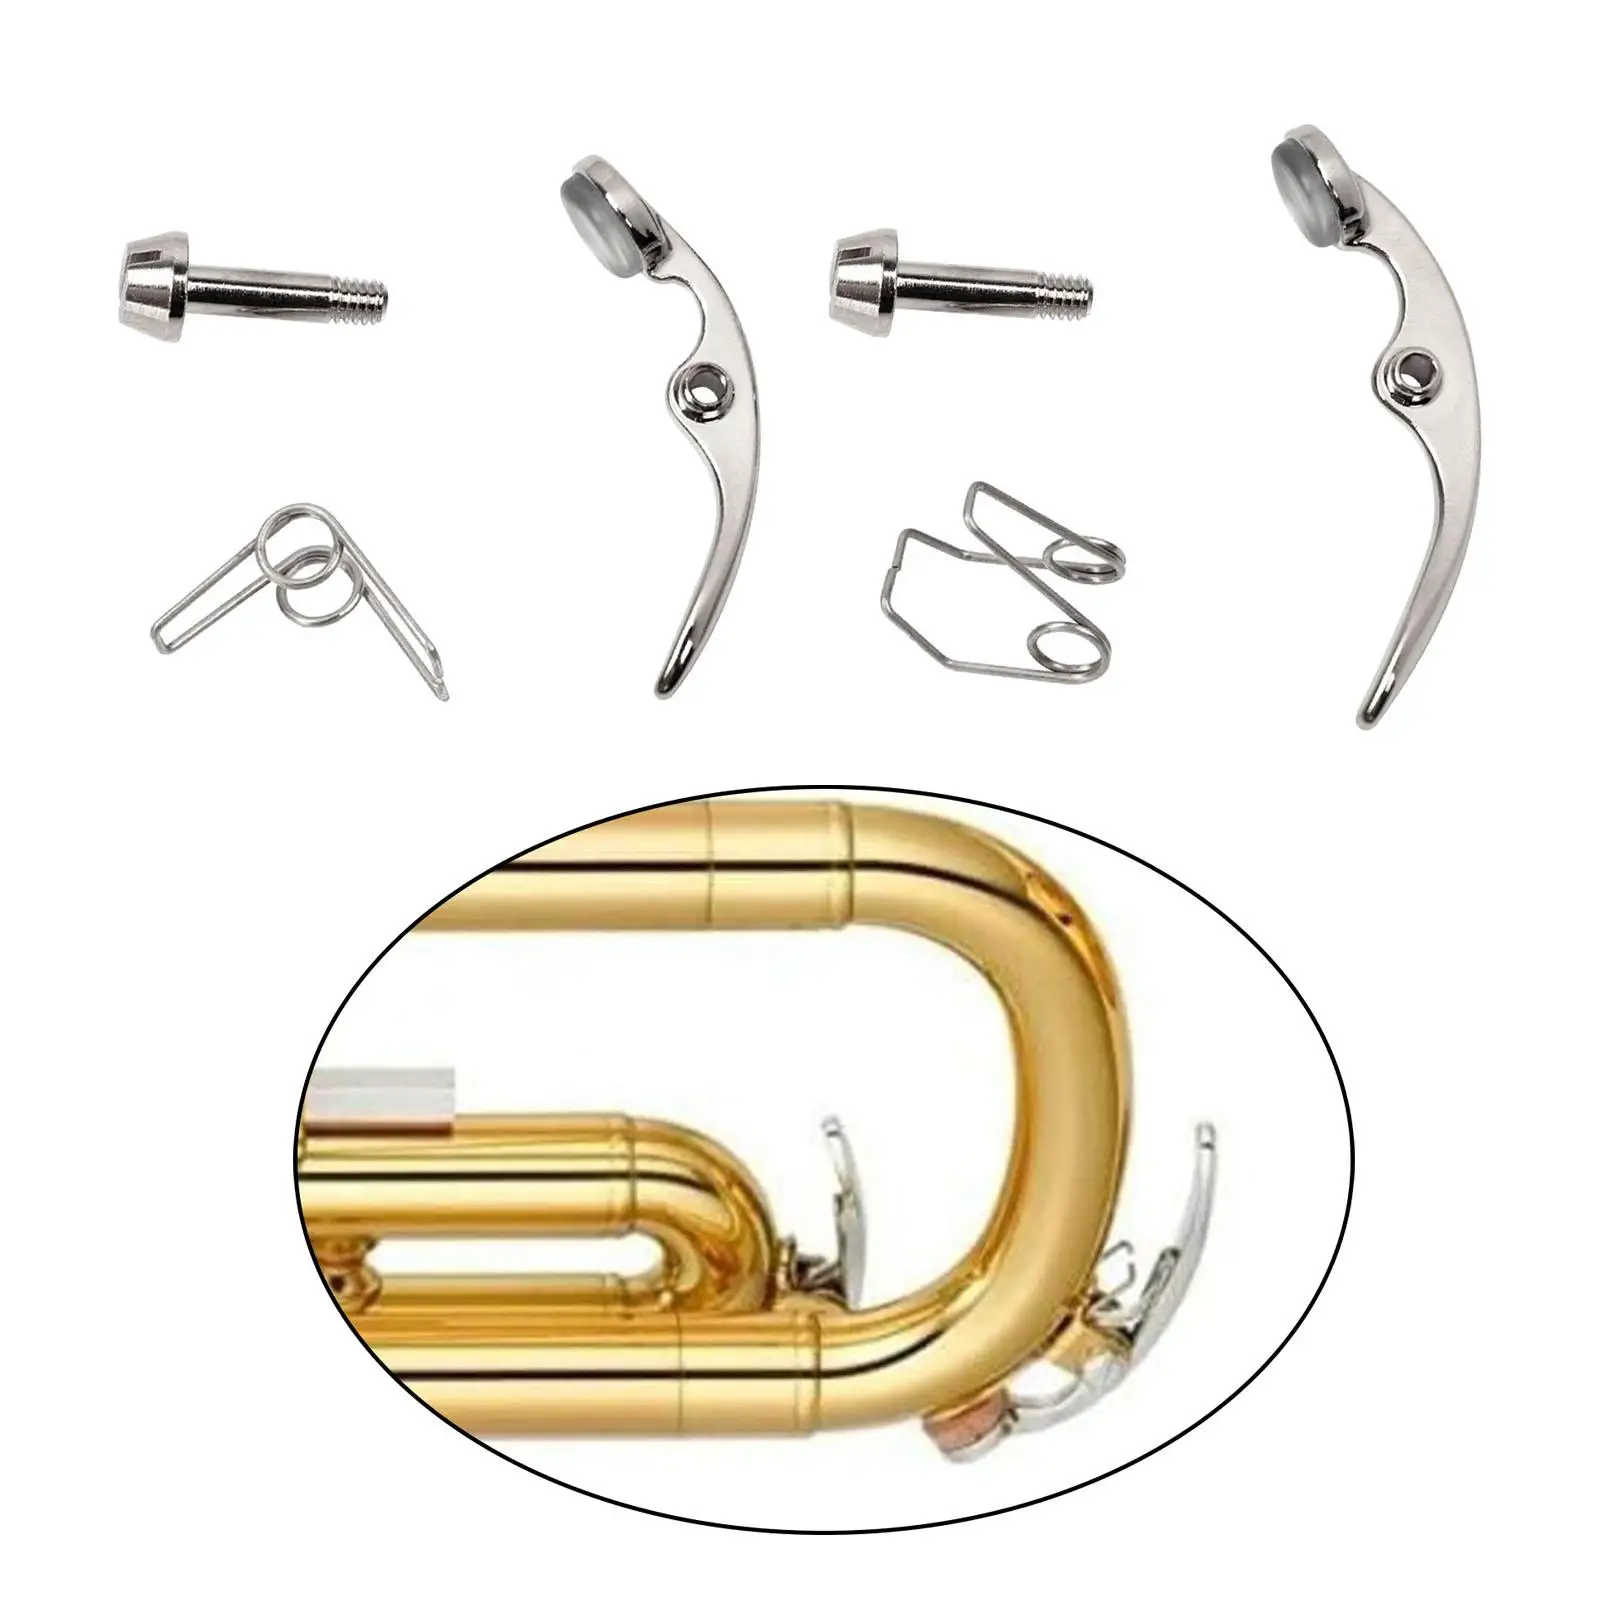 Trumpet Water Value Repair Kits, Water Value Holders Portable Accessory, with Springs Screws Replacement Parts for Repairing